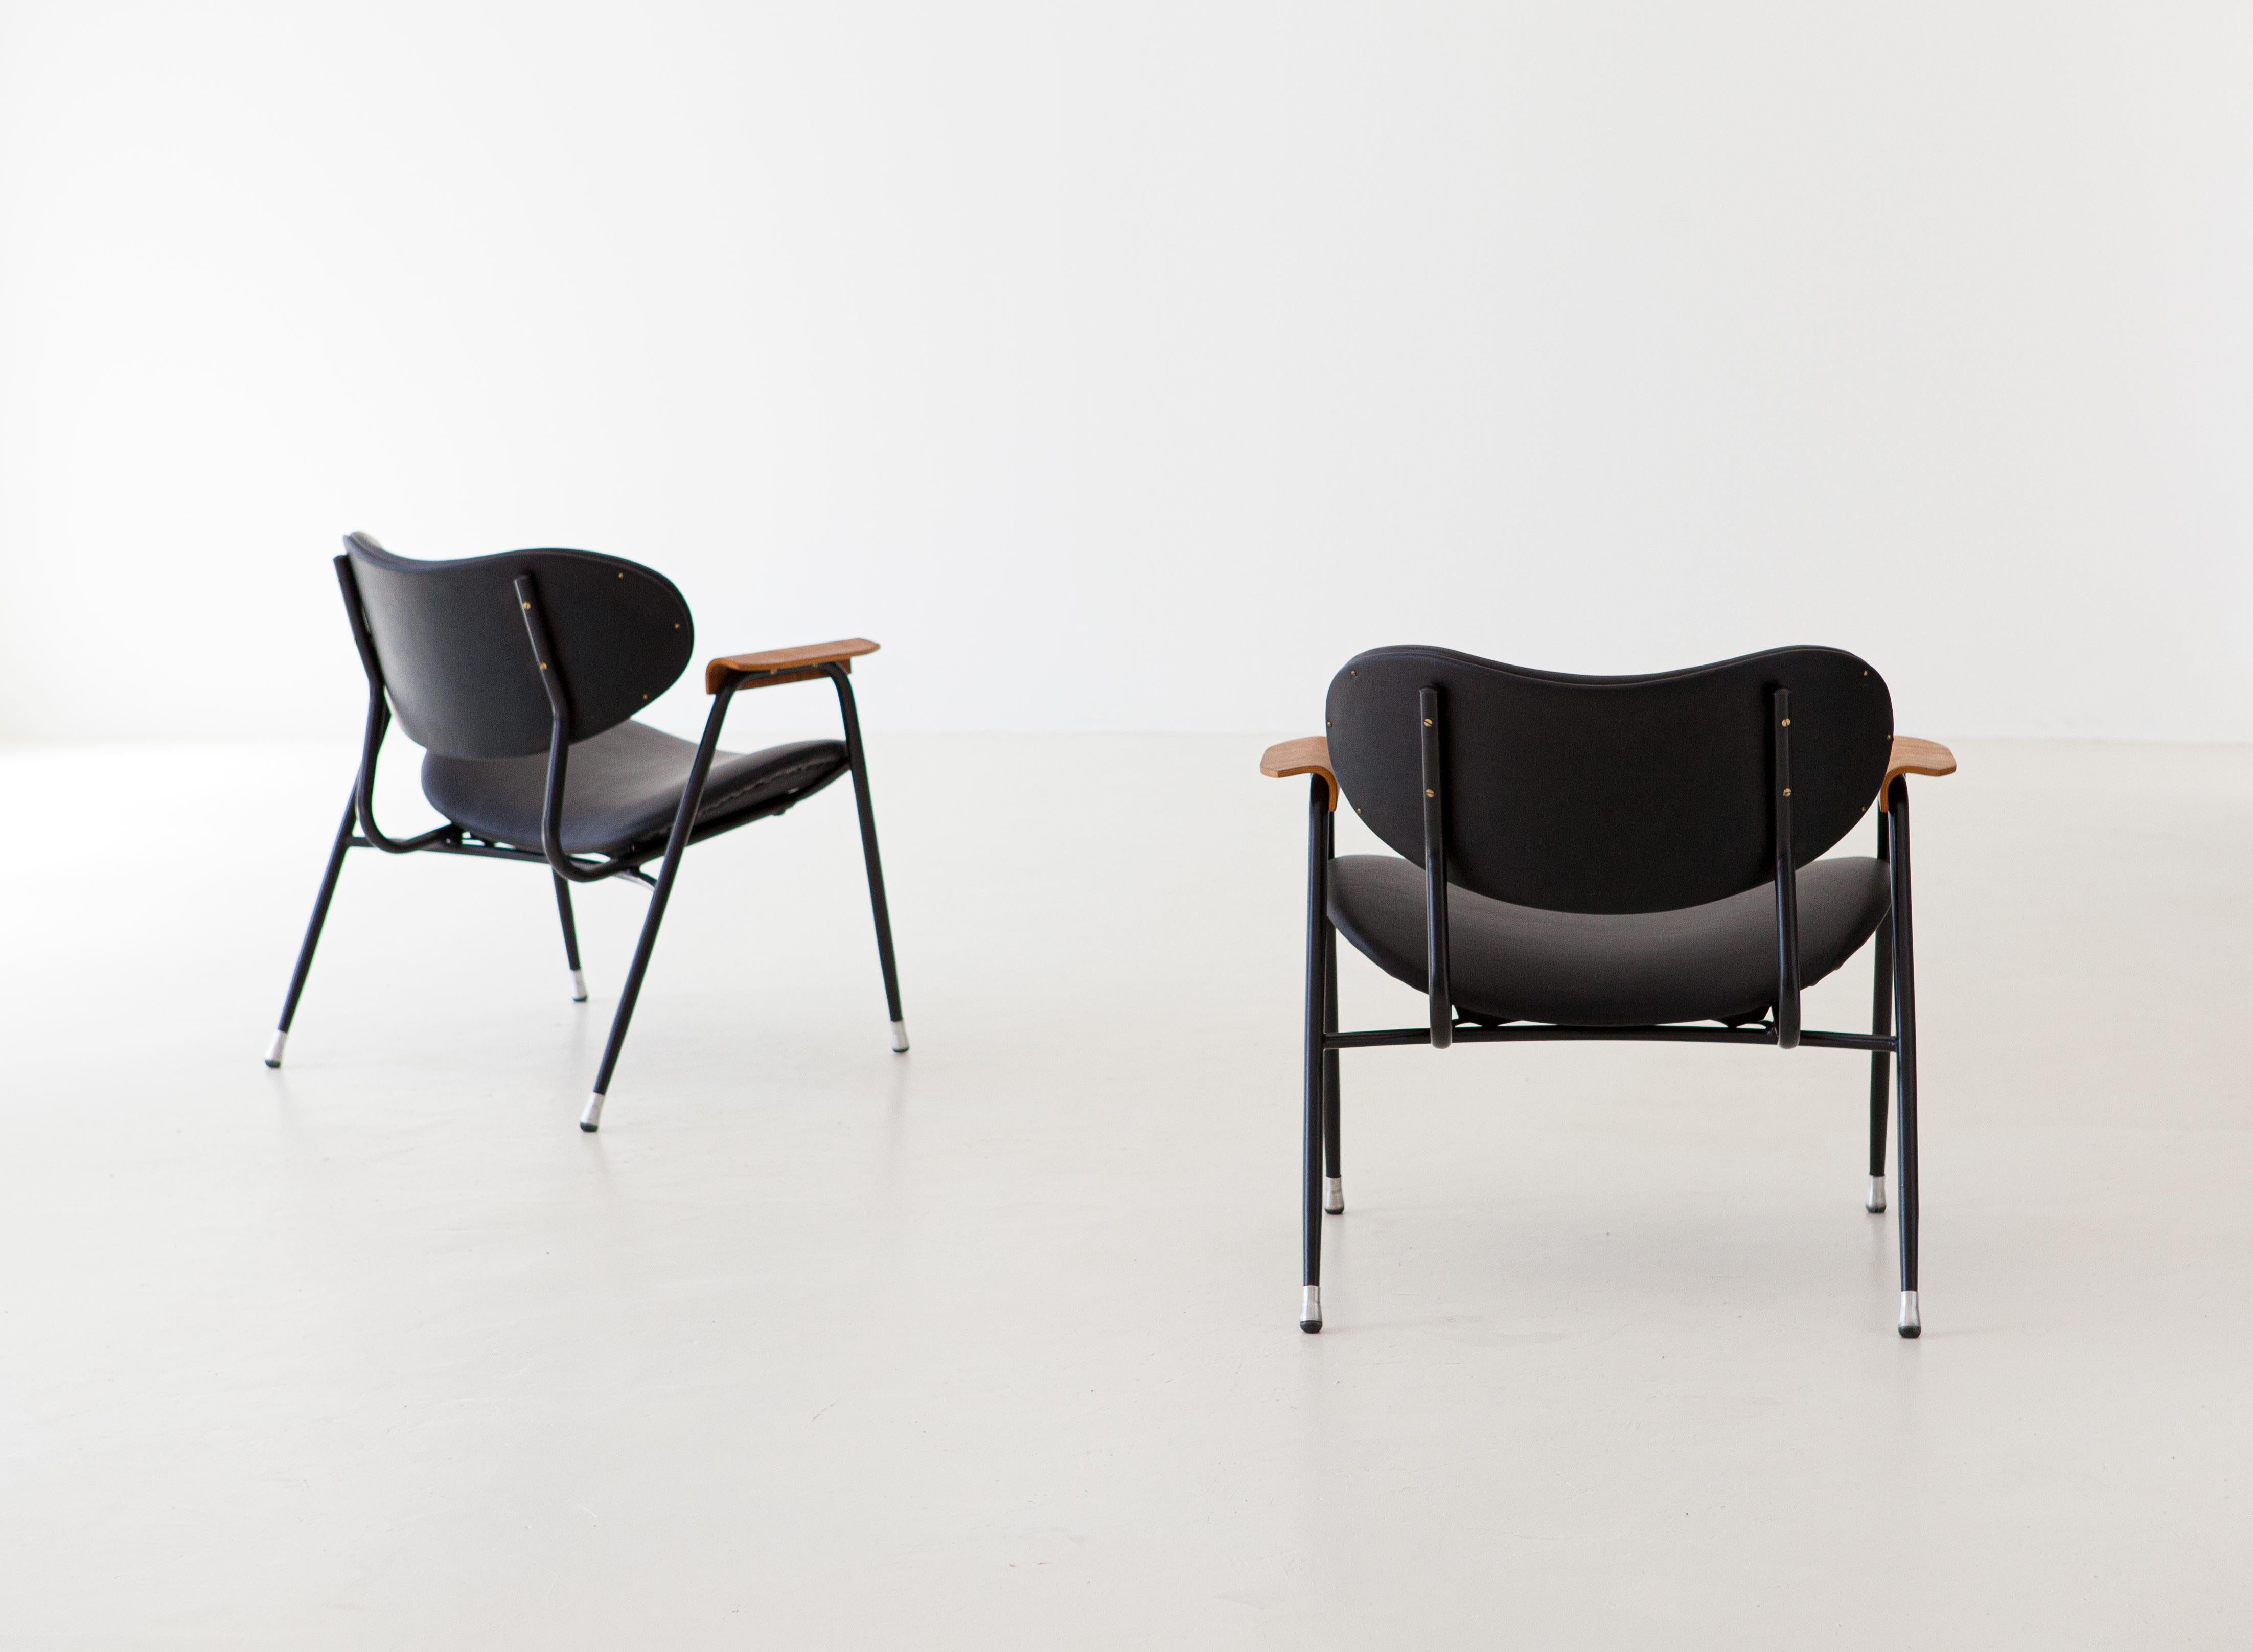 Set of two of Italian modern easy chairs with curved teak armrests, designed by Gastone Rinaldi and produced by RIMA during the 1950s. 

Completely restored: 
New black natural leather and new padding 
New black enamel on the iron frame
Sanding